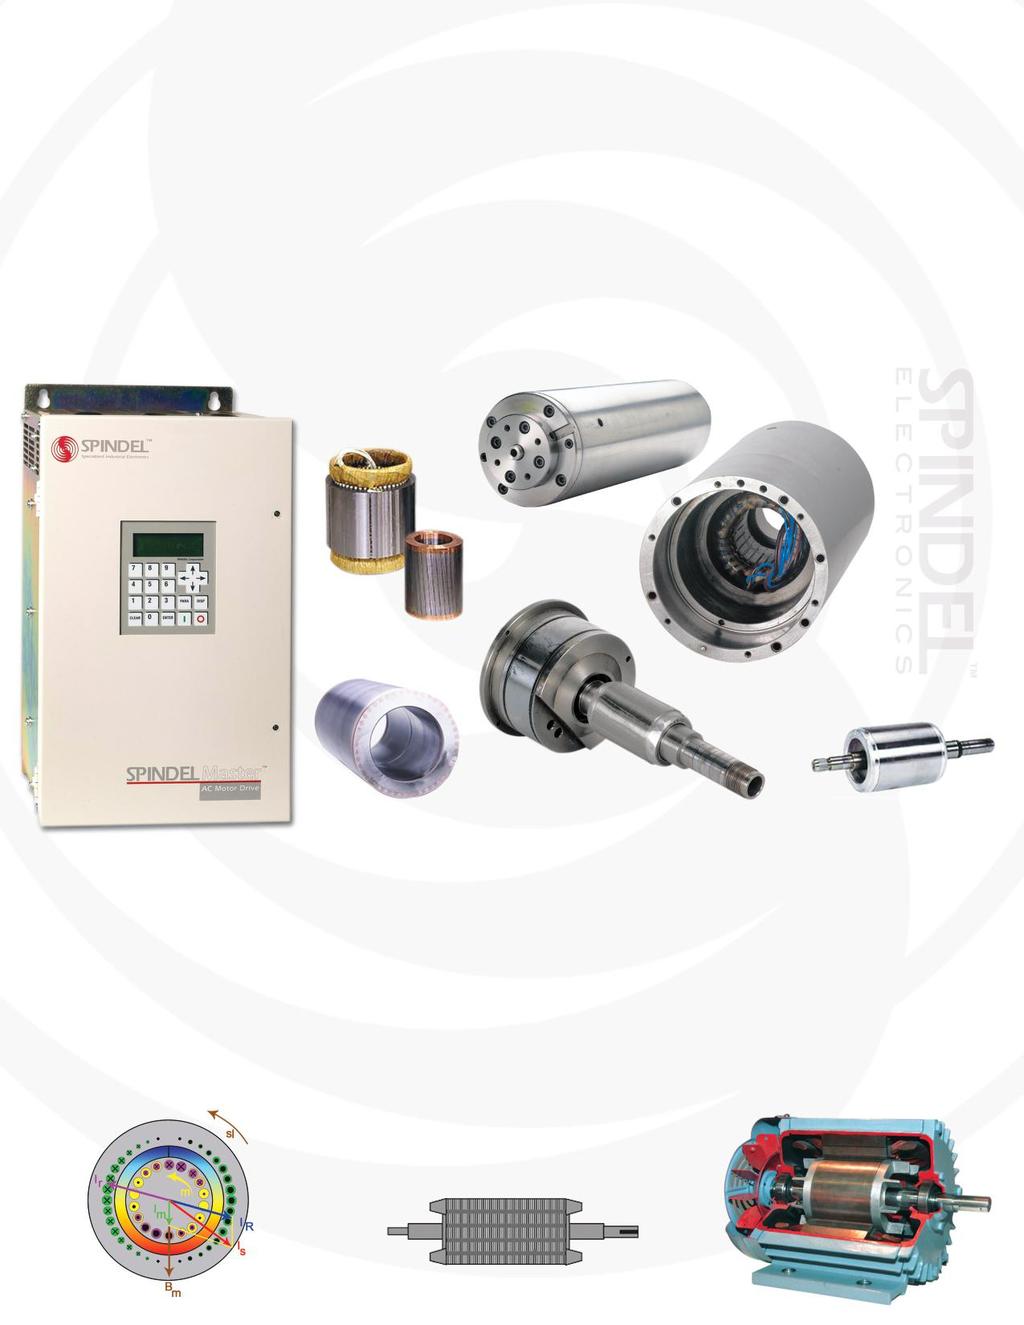 High Frequency/Precision Drives by Design SPINDEL Master is a line of universal high frequency drives, suited for operation of a wide range of phase AC motors, from standard low speed motors rated 50